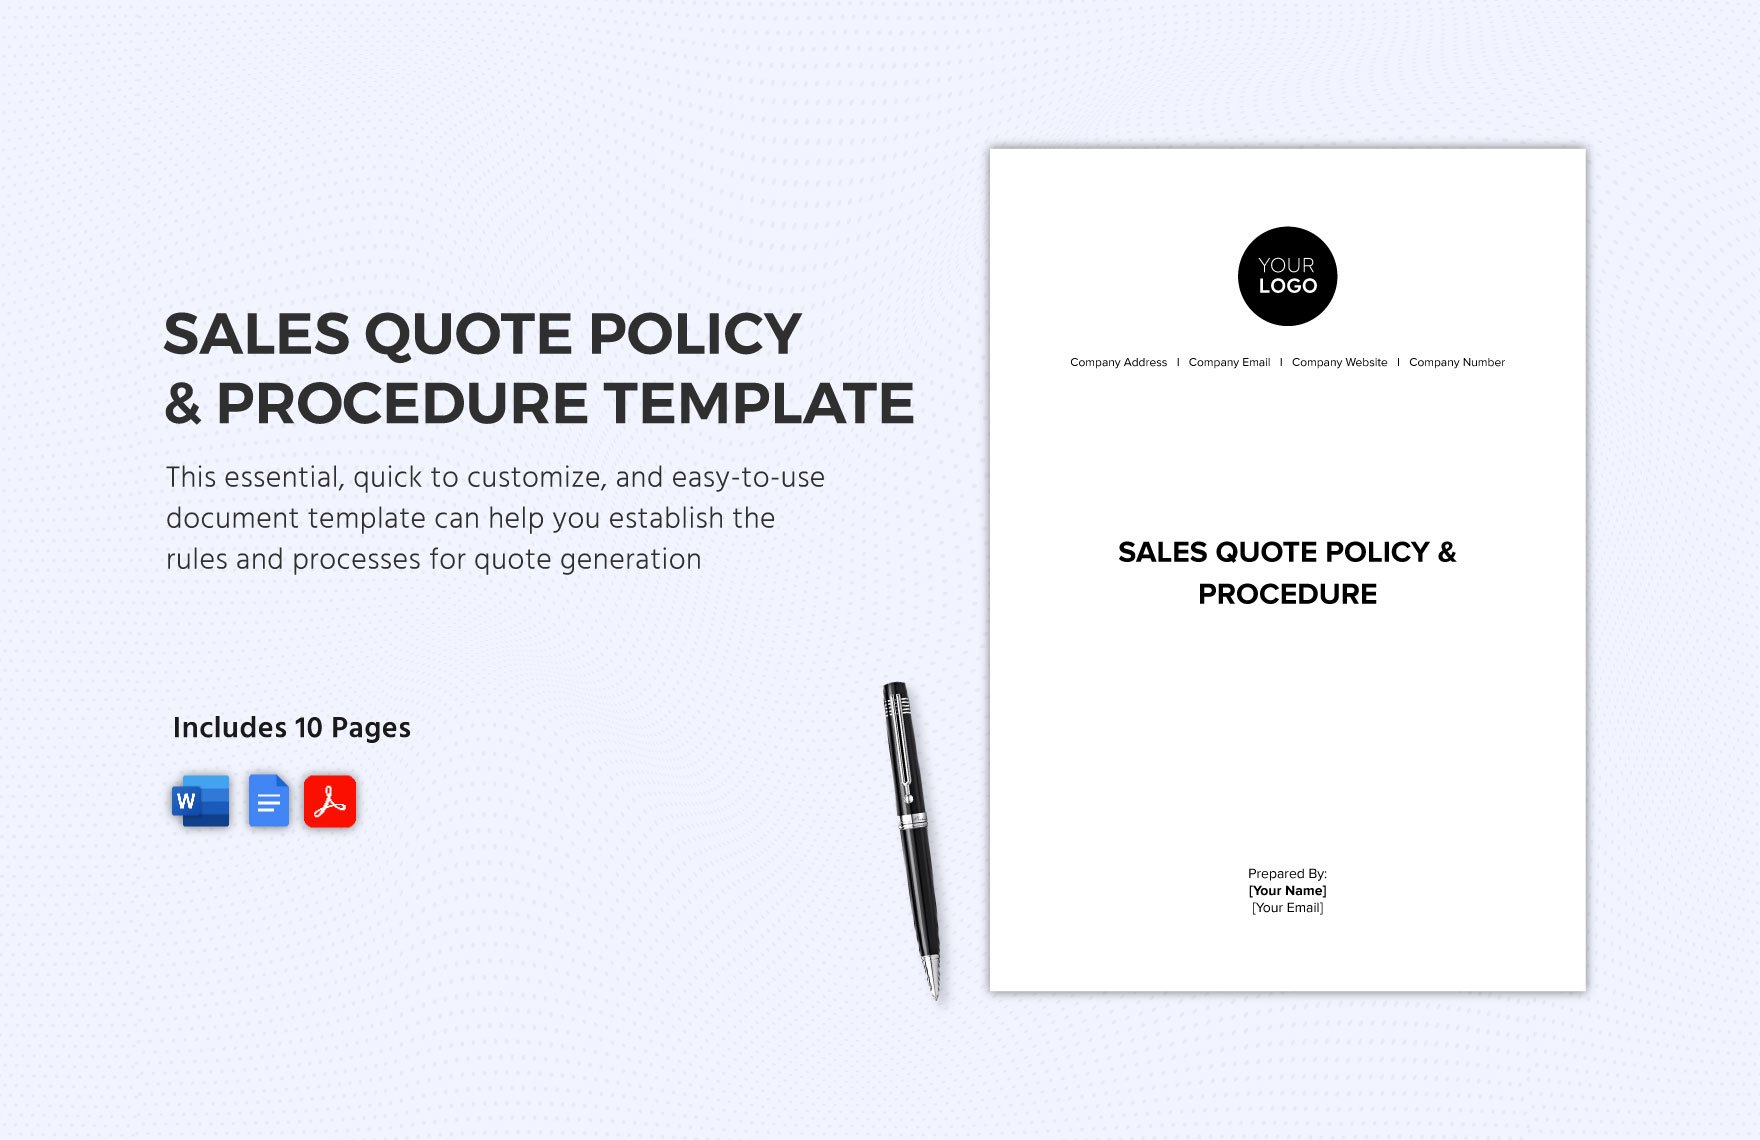 Sales Quote Policy & Procedure Template in Word, Google Docs, PDF